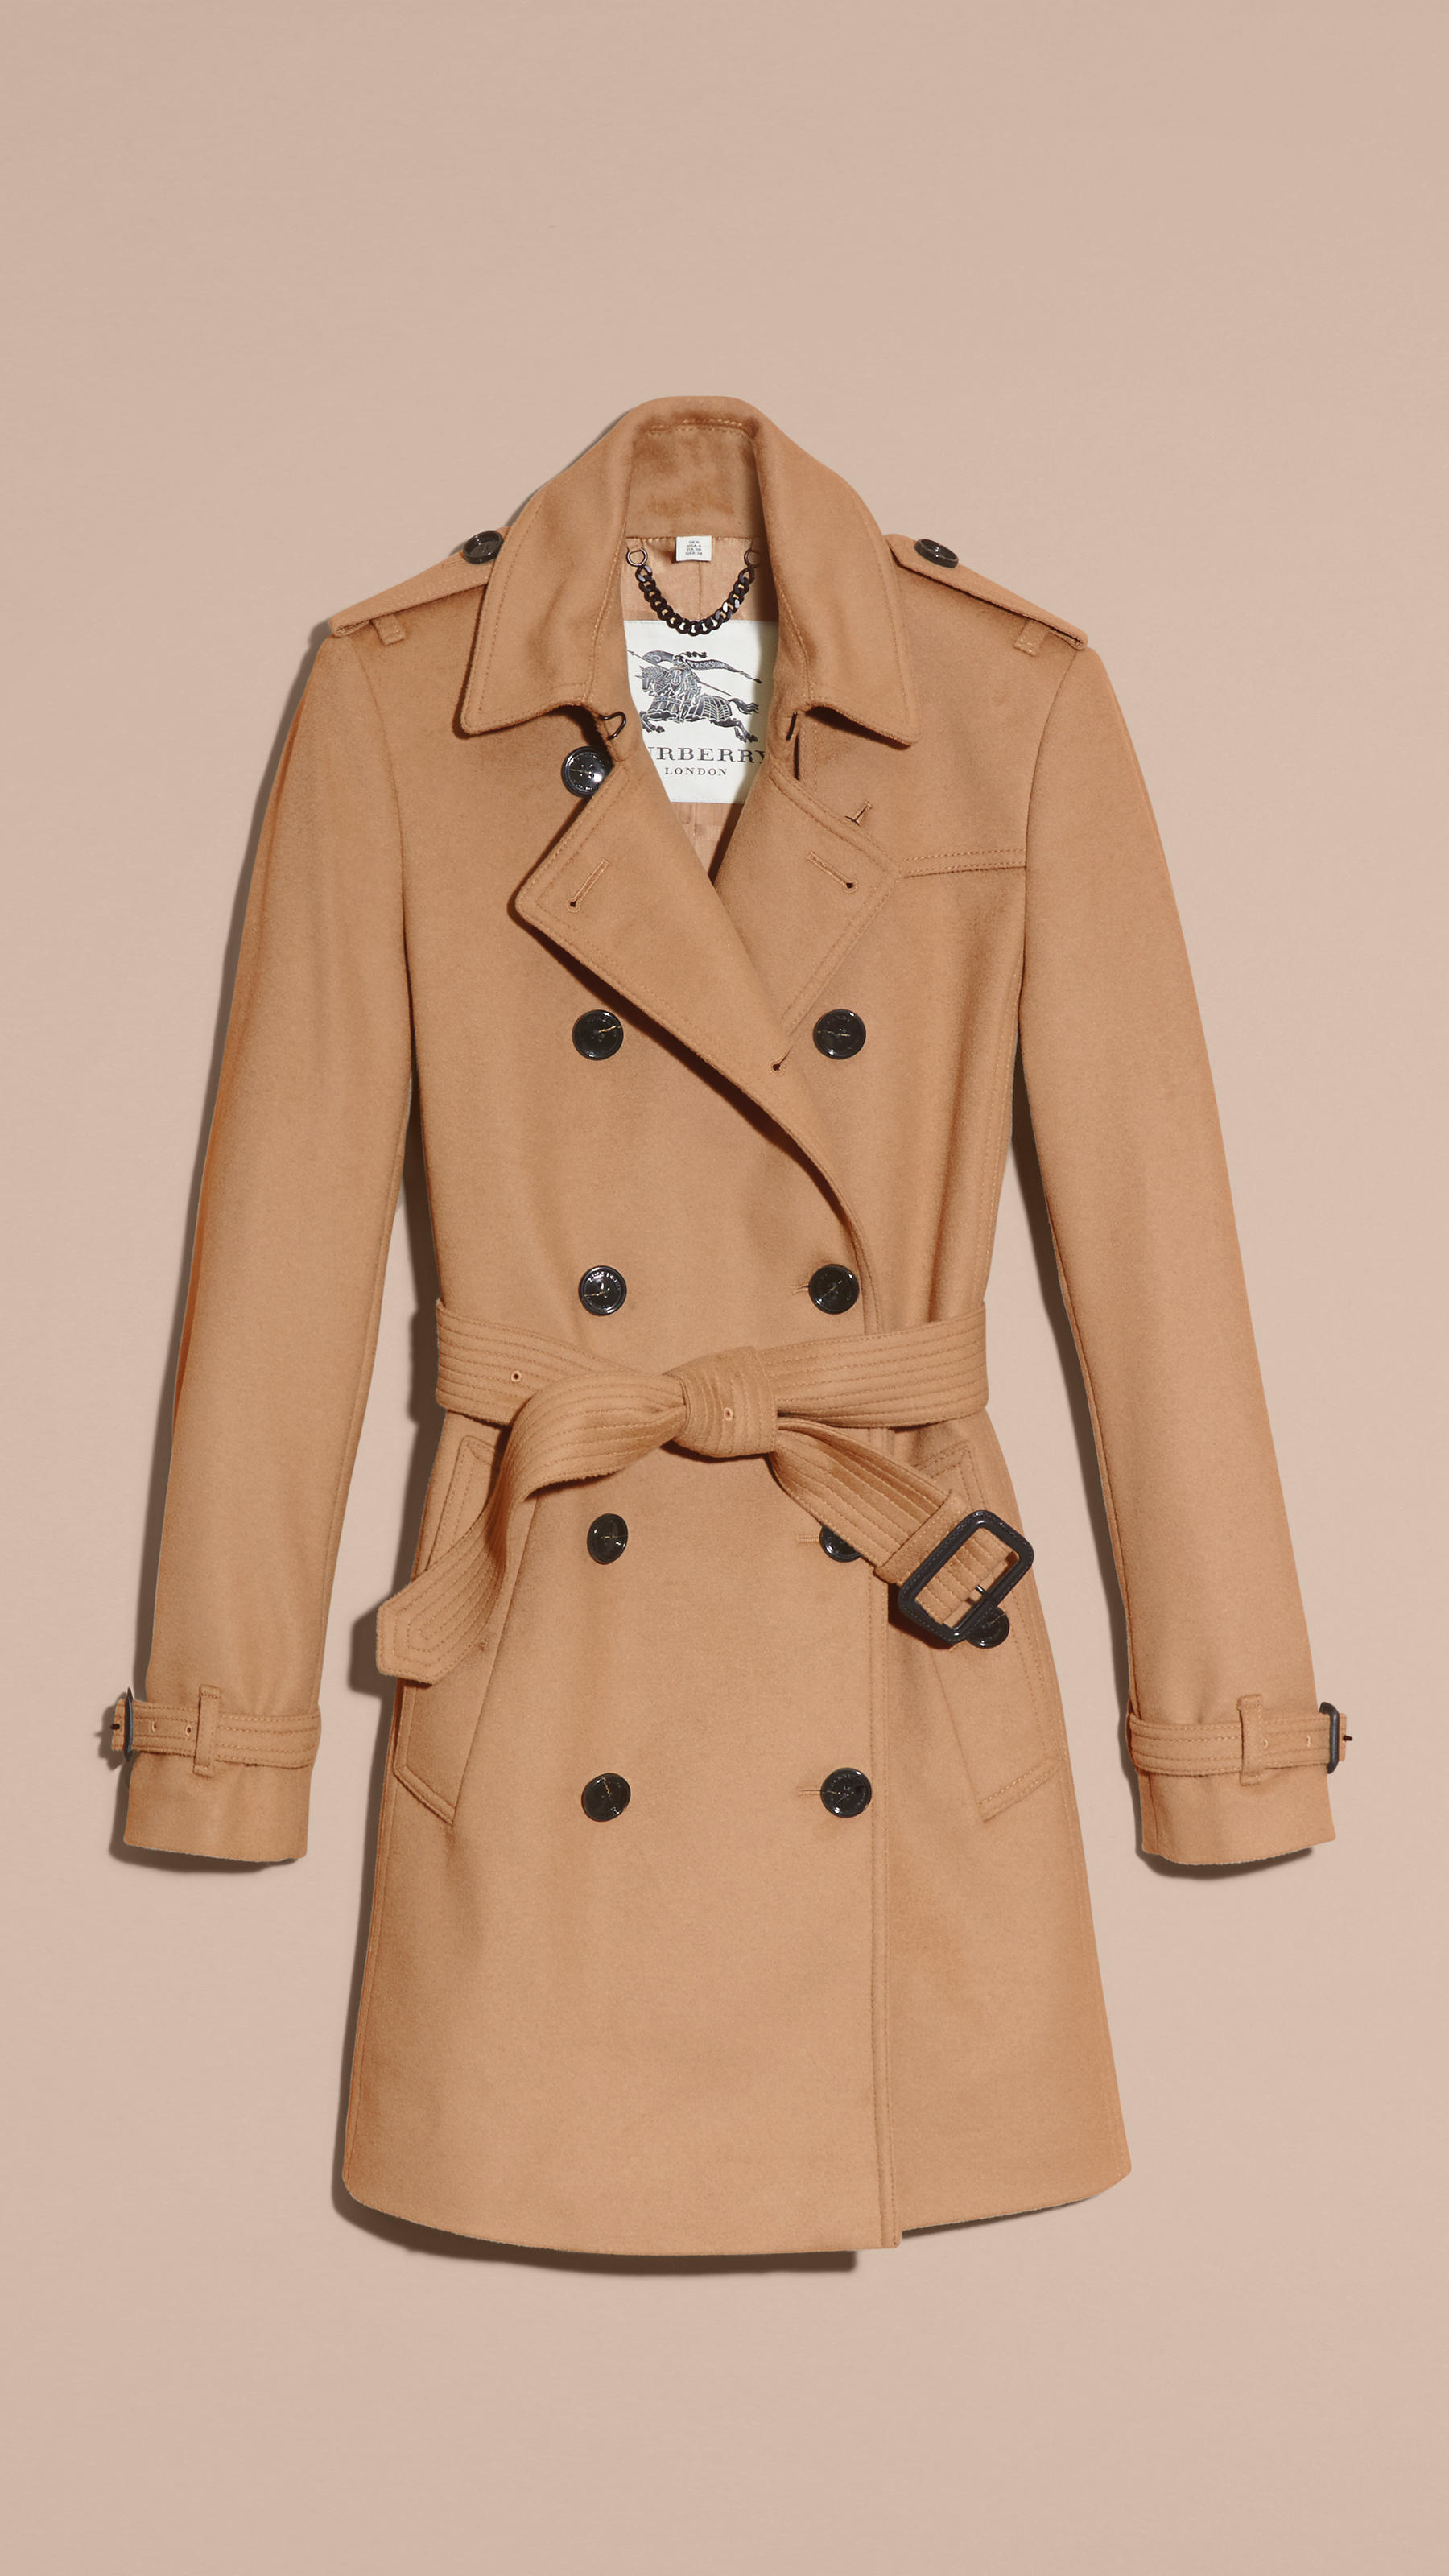 Lyst - Burberry Wool Cashmere Trench Coat in Natural